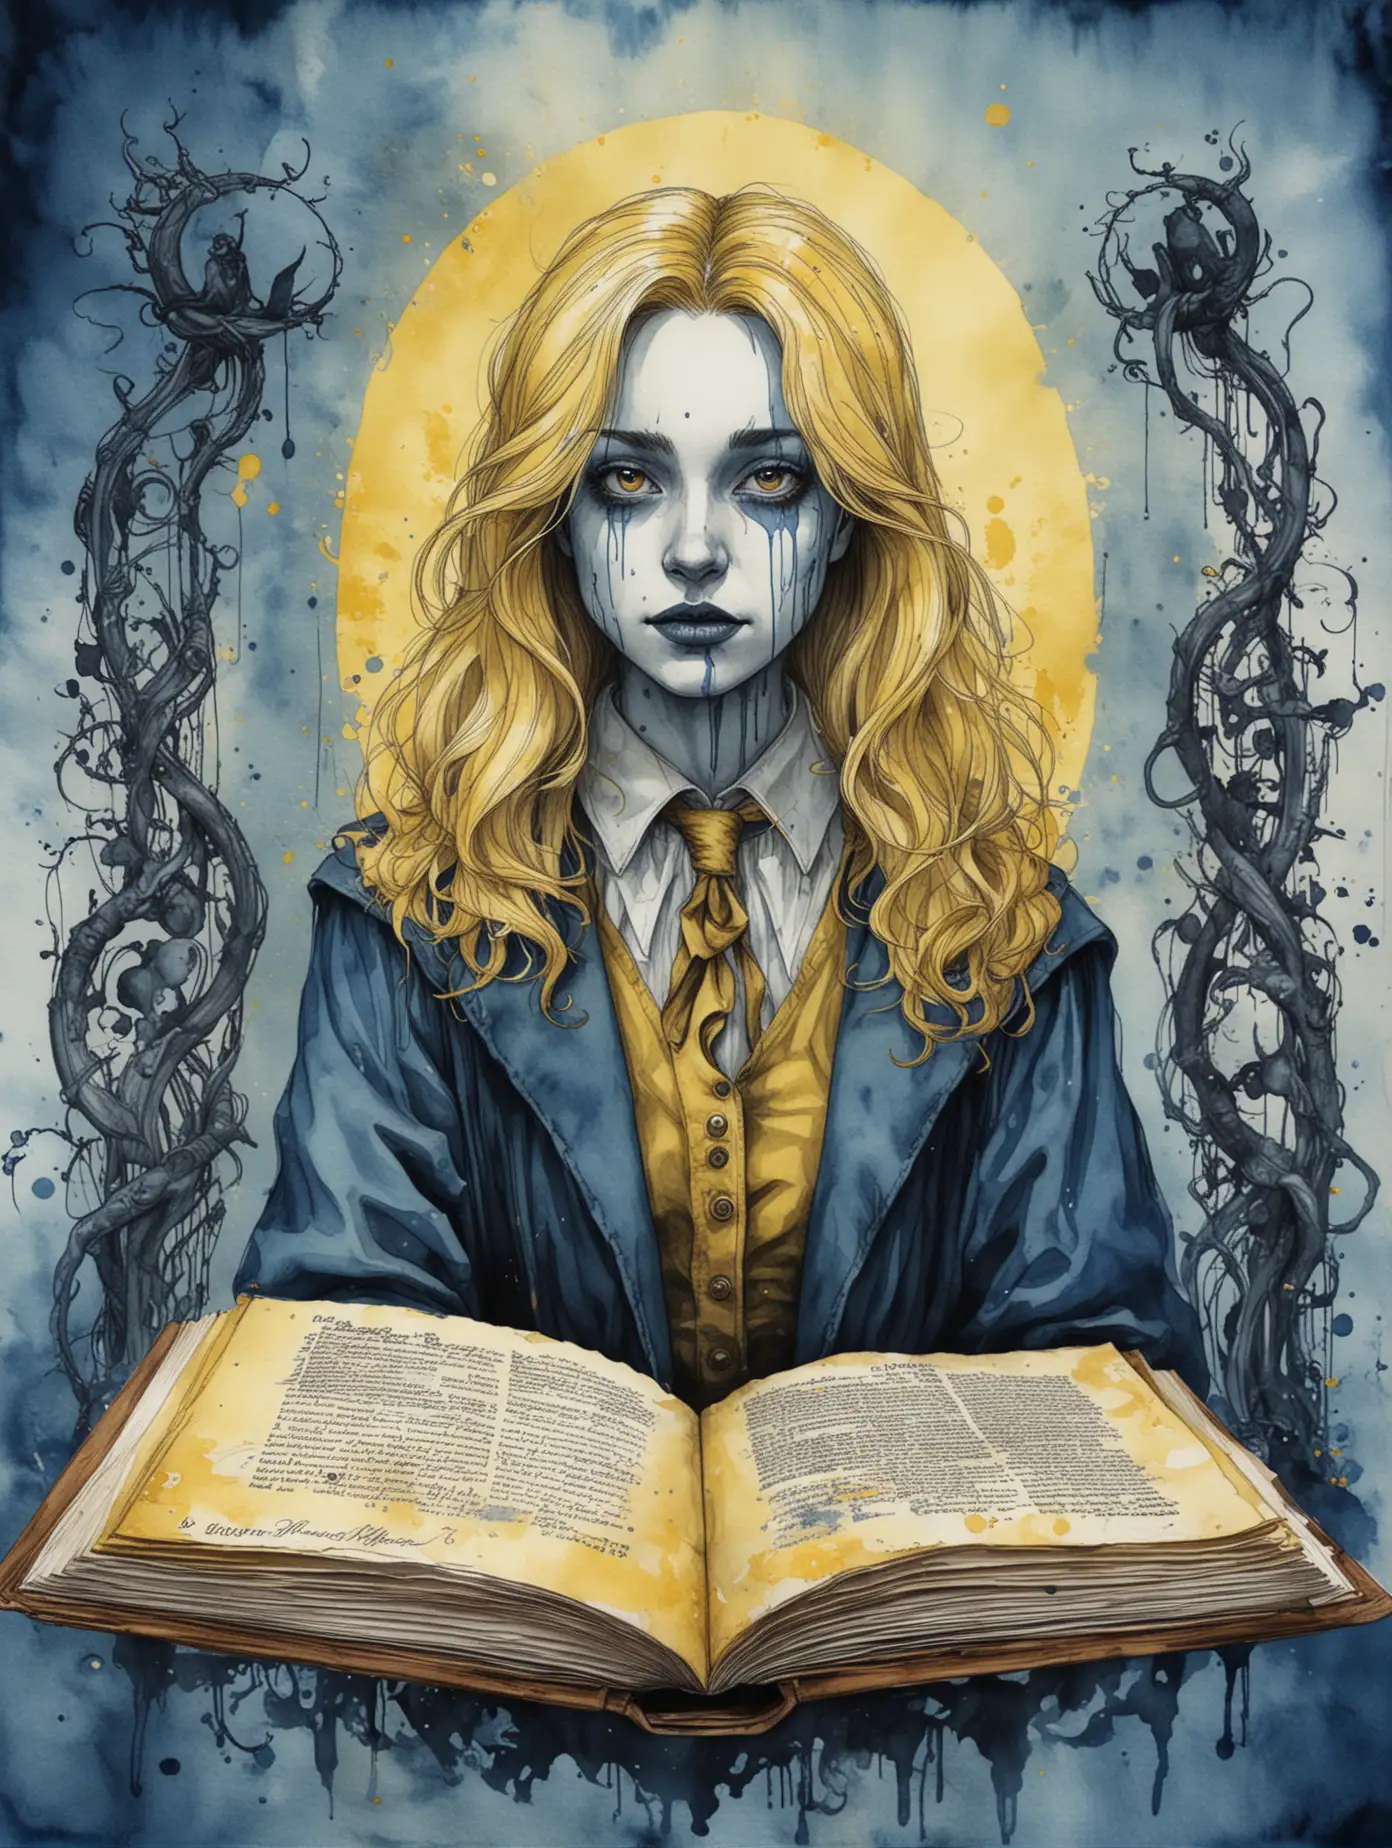 Digital illustration, dark arts, dark academia, pages, 300dpi, Graphic Art, in a yellow and blue watercolour and ink wash